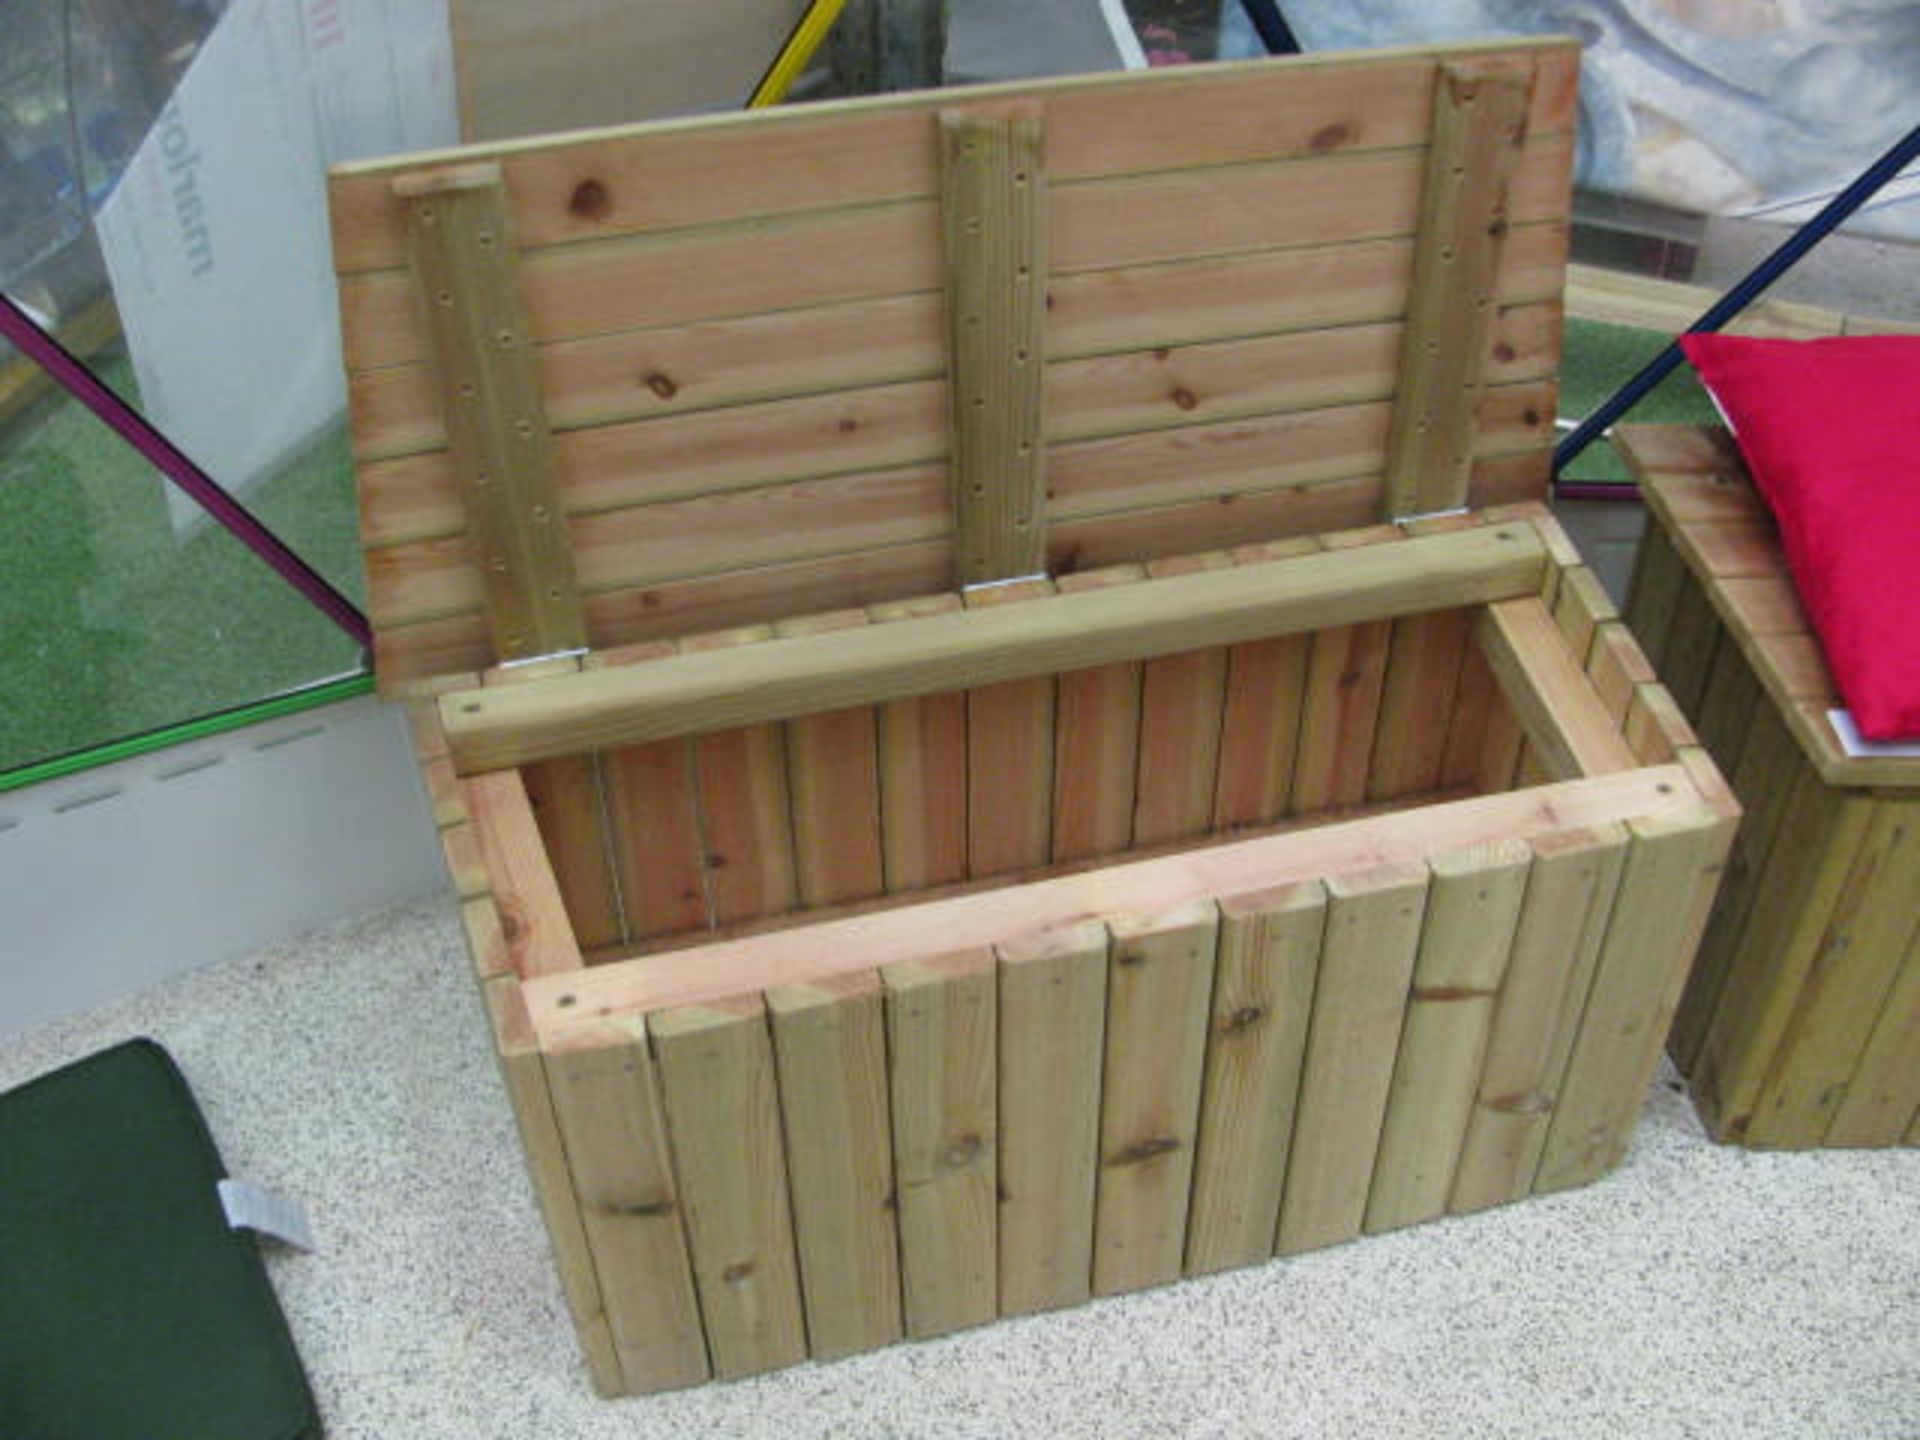 2X rustic timber bench boxes - Image 2 of 2